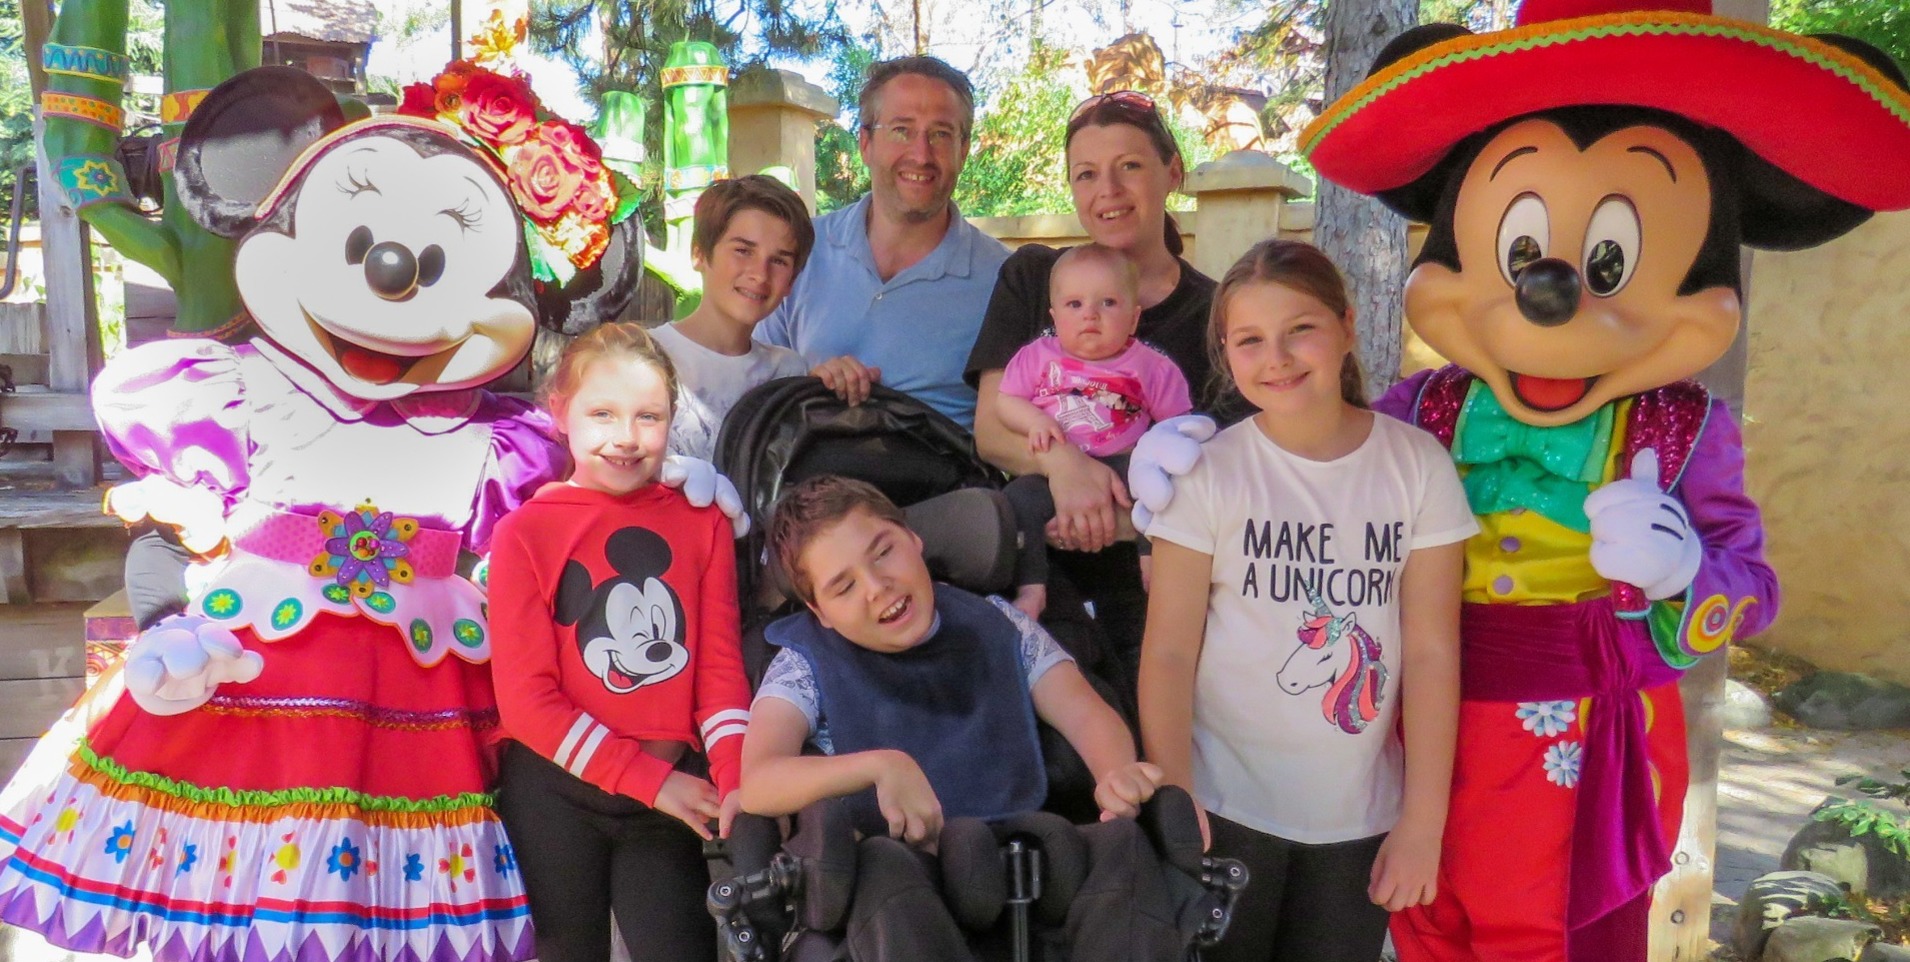 Star Wars Disneyland Paris teenage boy in wheelchair having a photo with his family and Darth Vader - Life with the Merrys